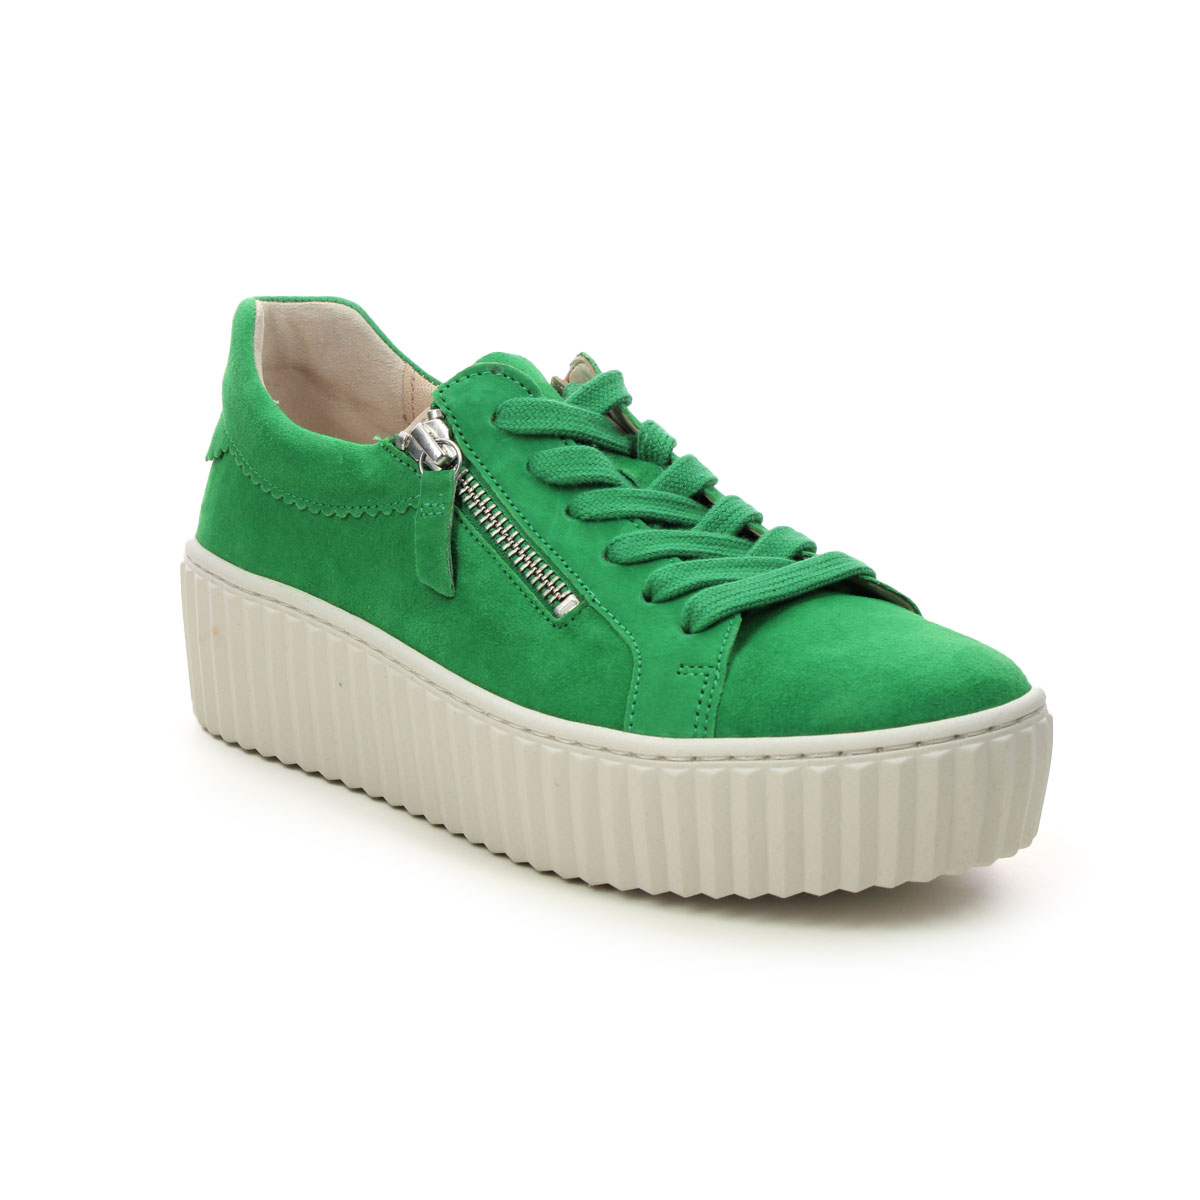 Gabor Dolly Green Suede Womens trainers 43.200.31 in a Plain Leather in Size 4